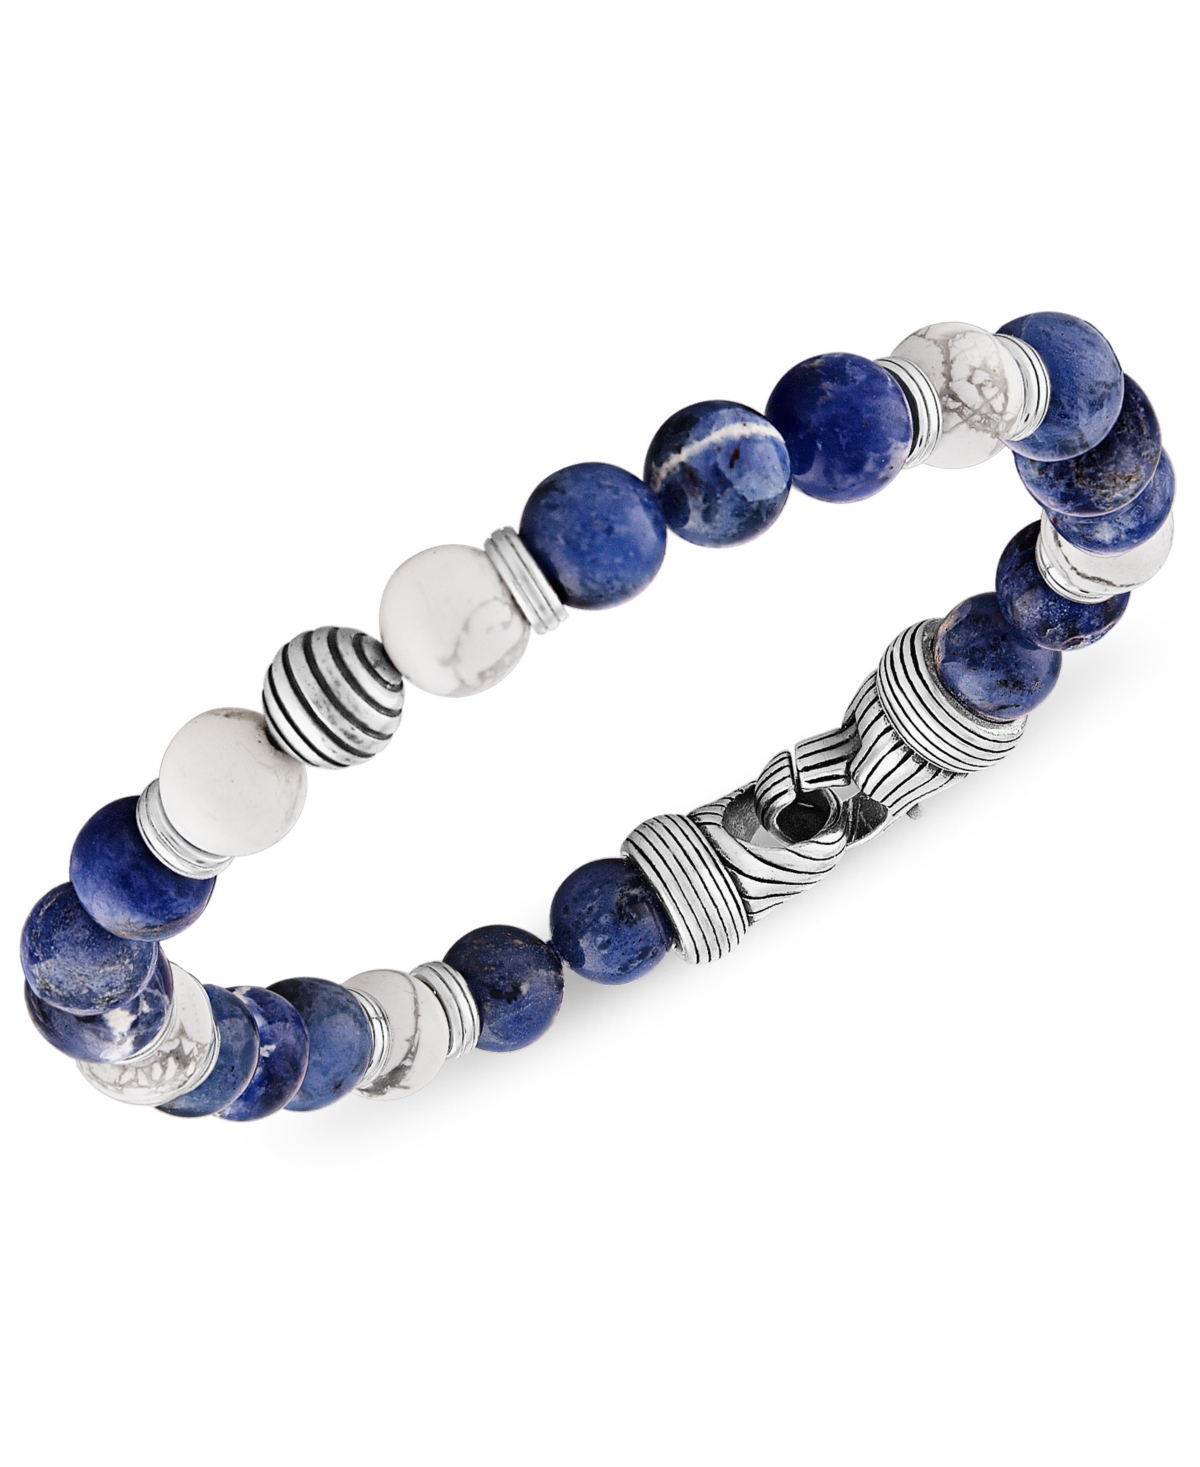 Sodalite & Howlite Bead Bracelet in Sterling Silver, Created for Macy's - Sterling Silver